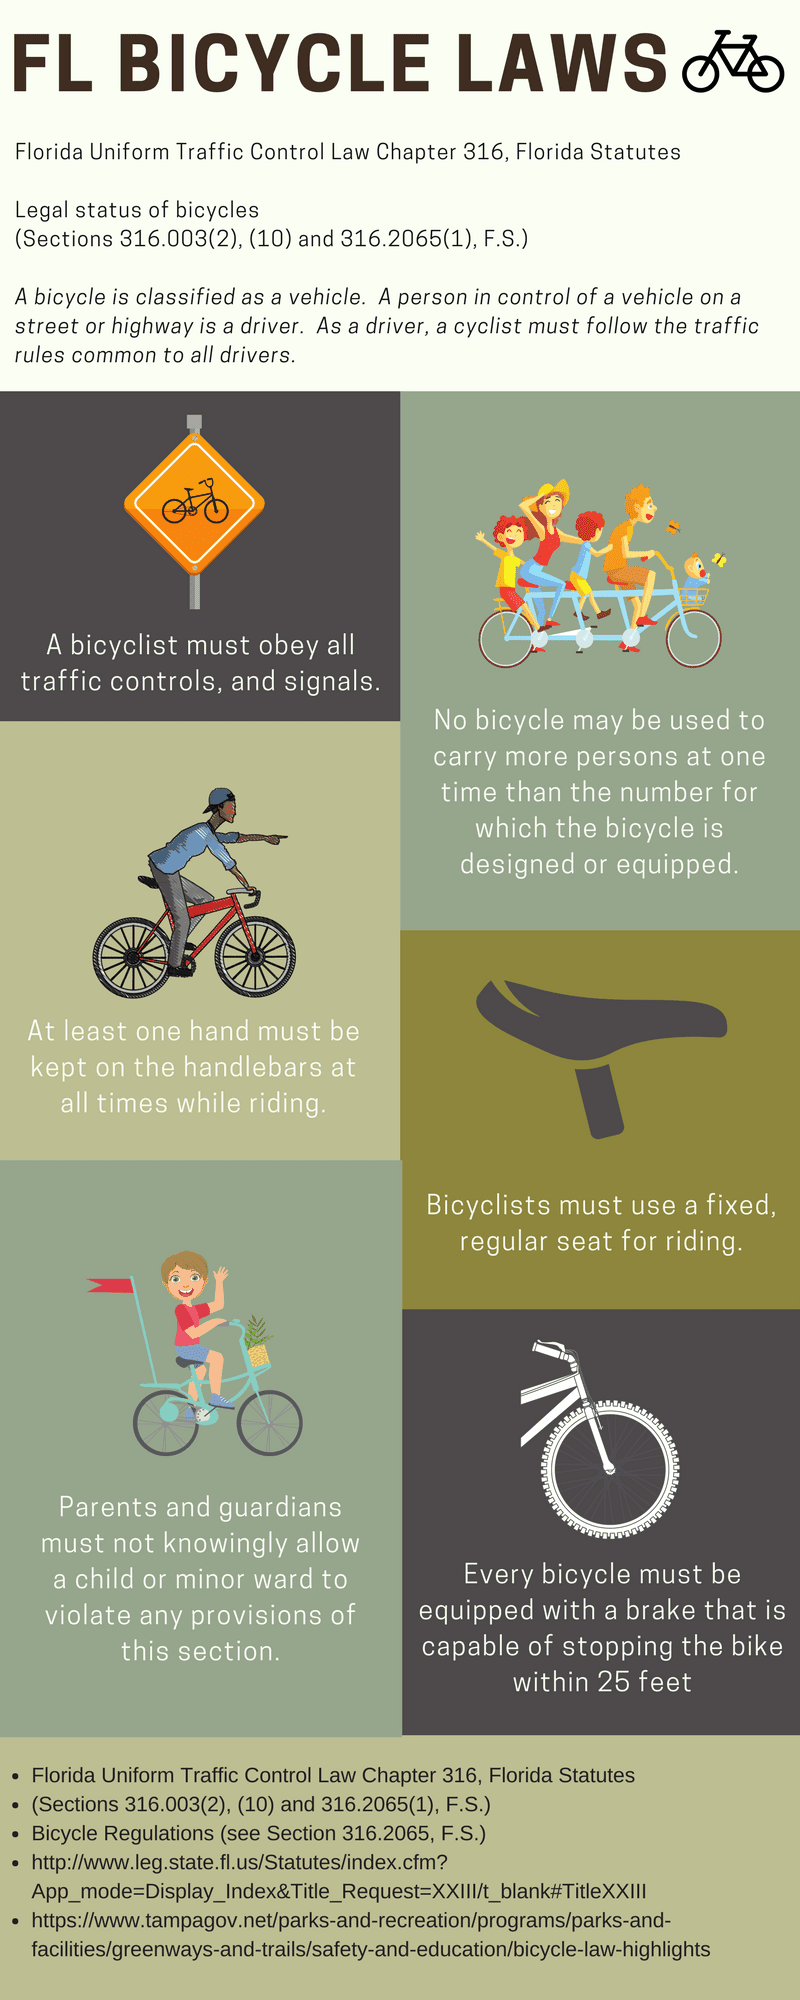 Bicycle laws infographic